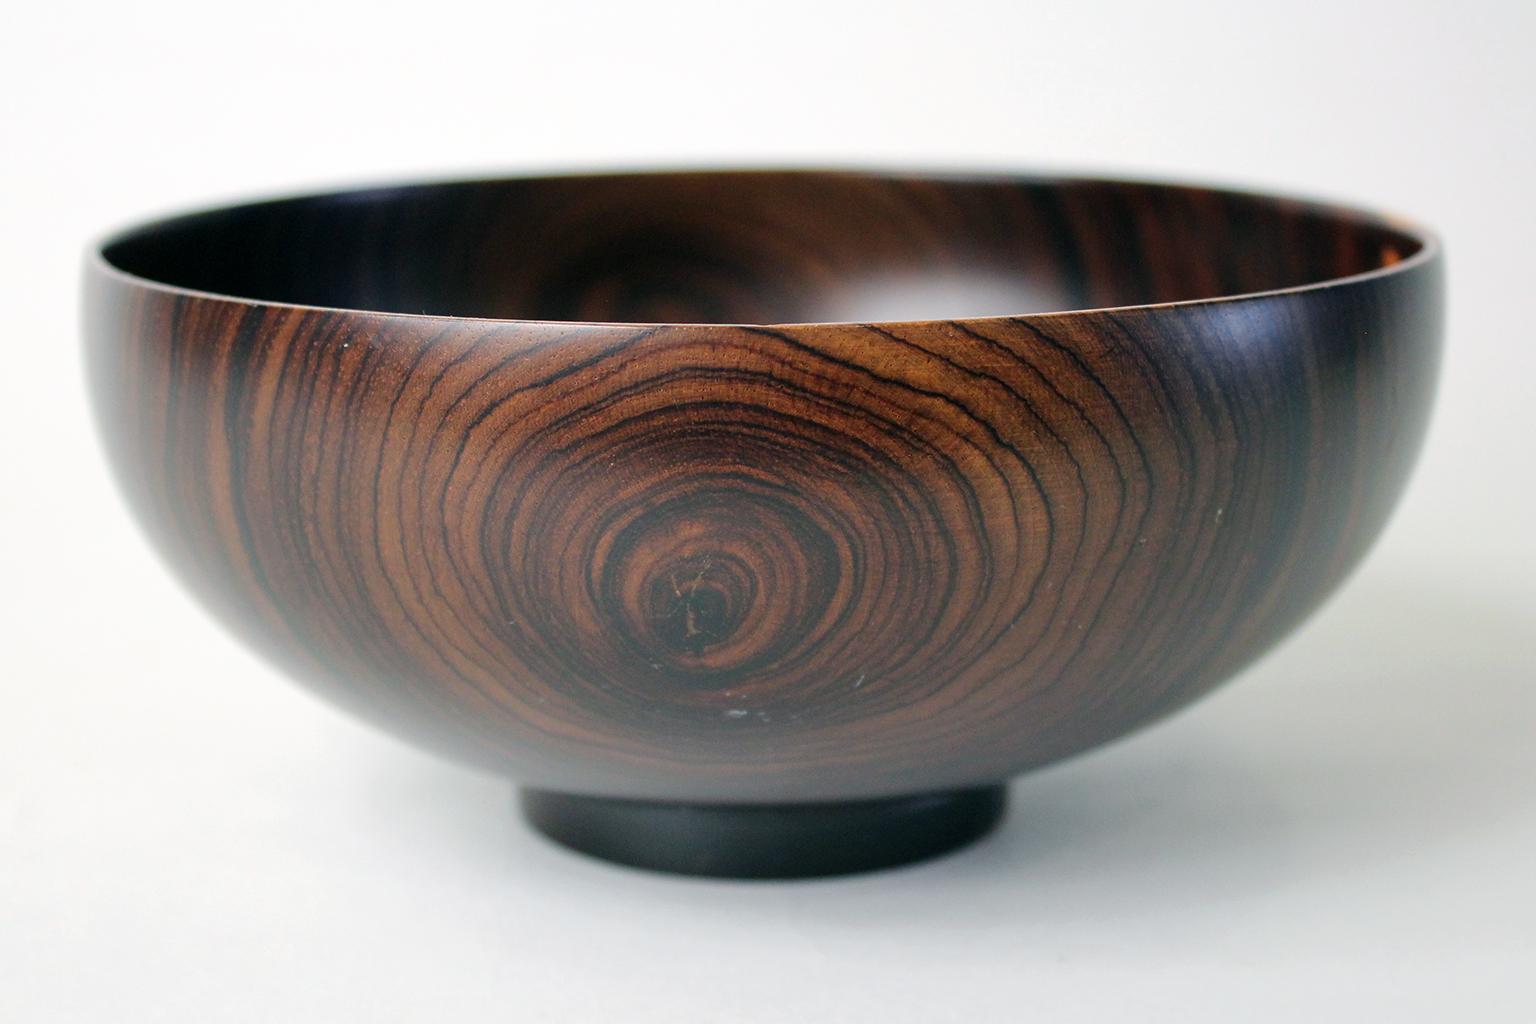 Excellent carved bowl by California Design artist, Bob Stocksdale. Signed on the bottom by the artist. Made from California Cocobolo woof from Mexico. Great design and form. The color and grain of the wood is second to none. In excellent shape.